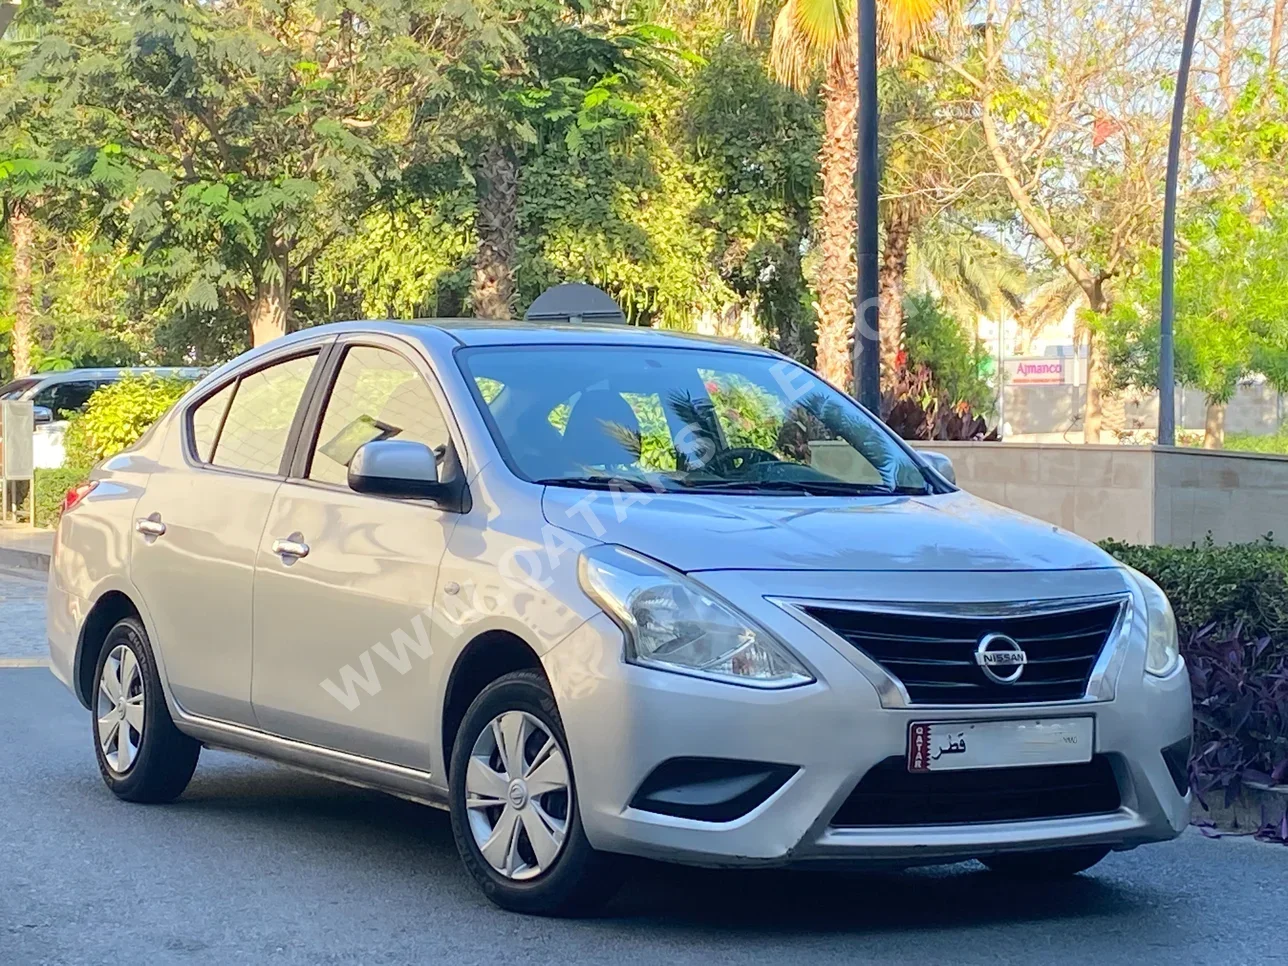 Nissan  Sunny  2019  Automatic  104,000 Km  4 Cylinder  Front Wheel Drive (FWD)  Sedan  Silver